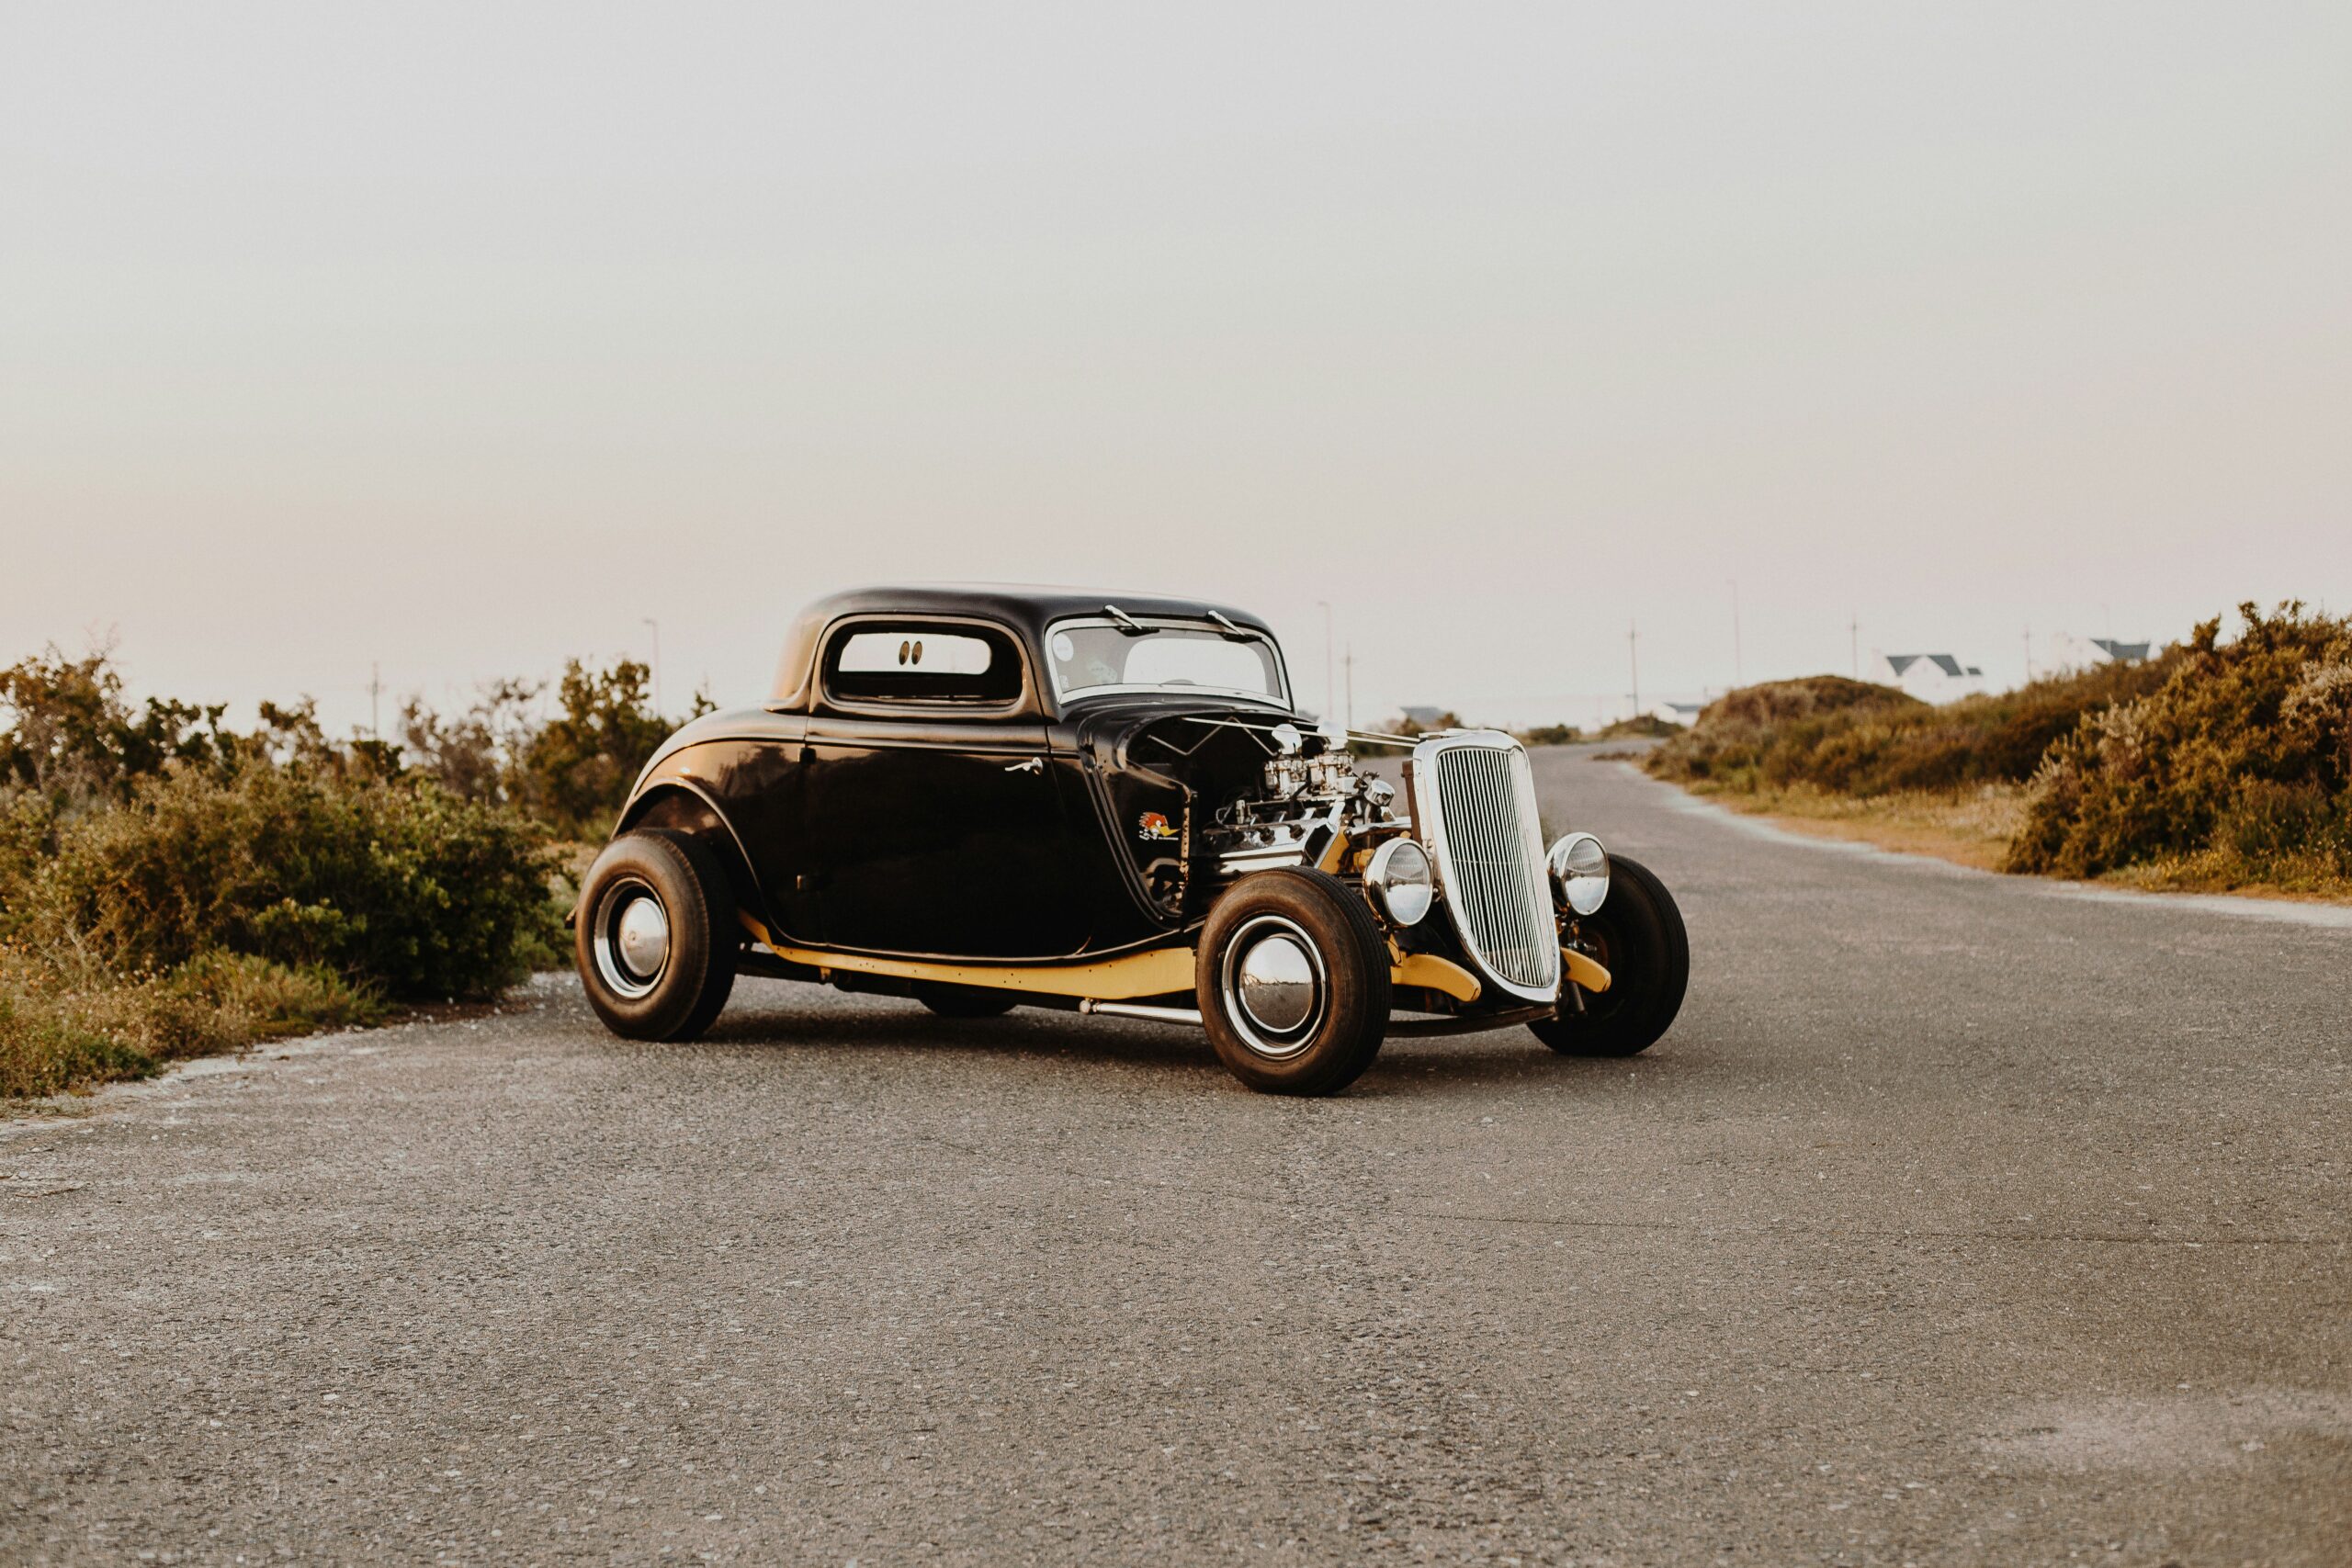 Vintage car investments have proven to be a lucrative alternative to traditional investment options such as stocks, bonds, and real estate.